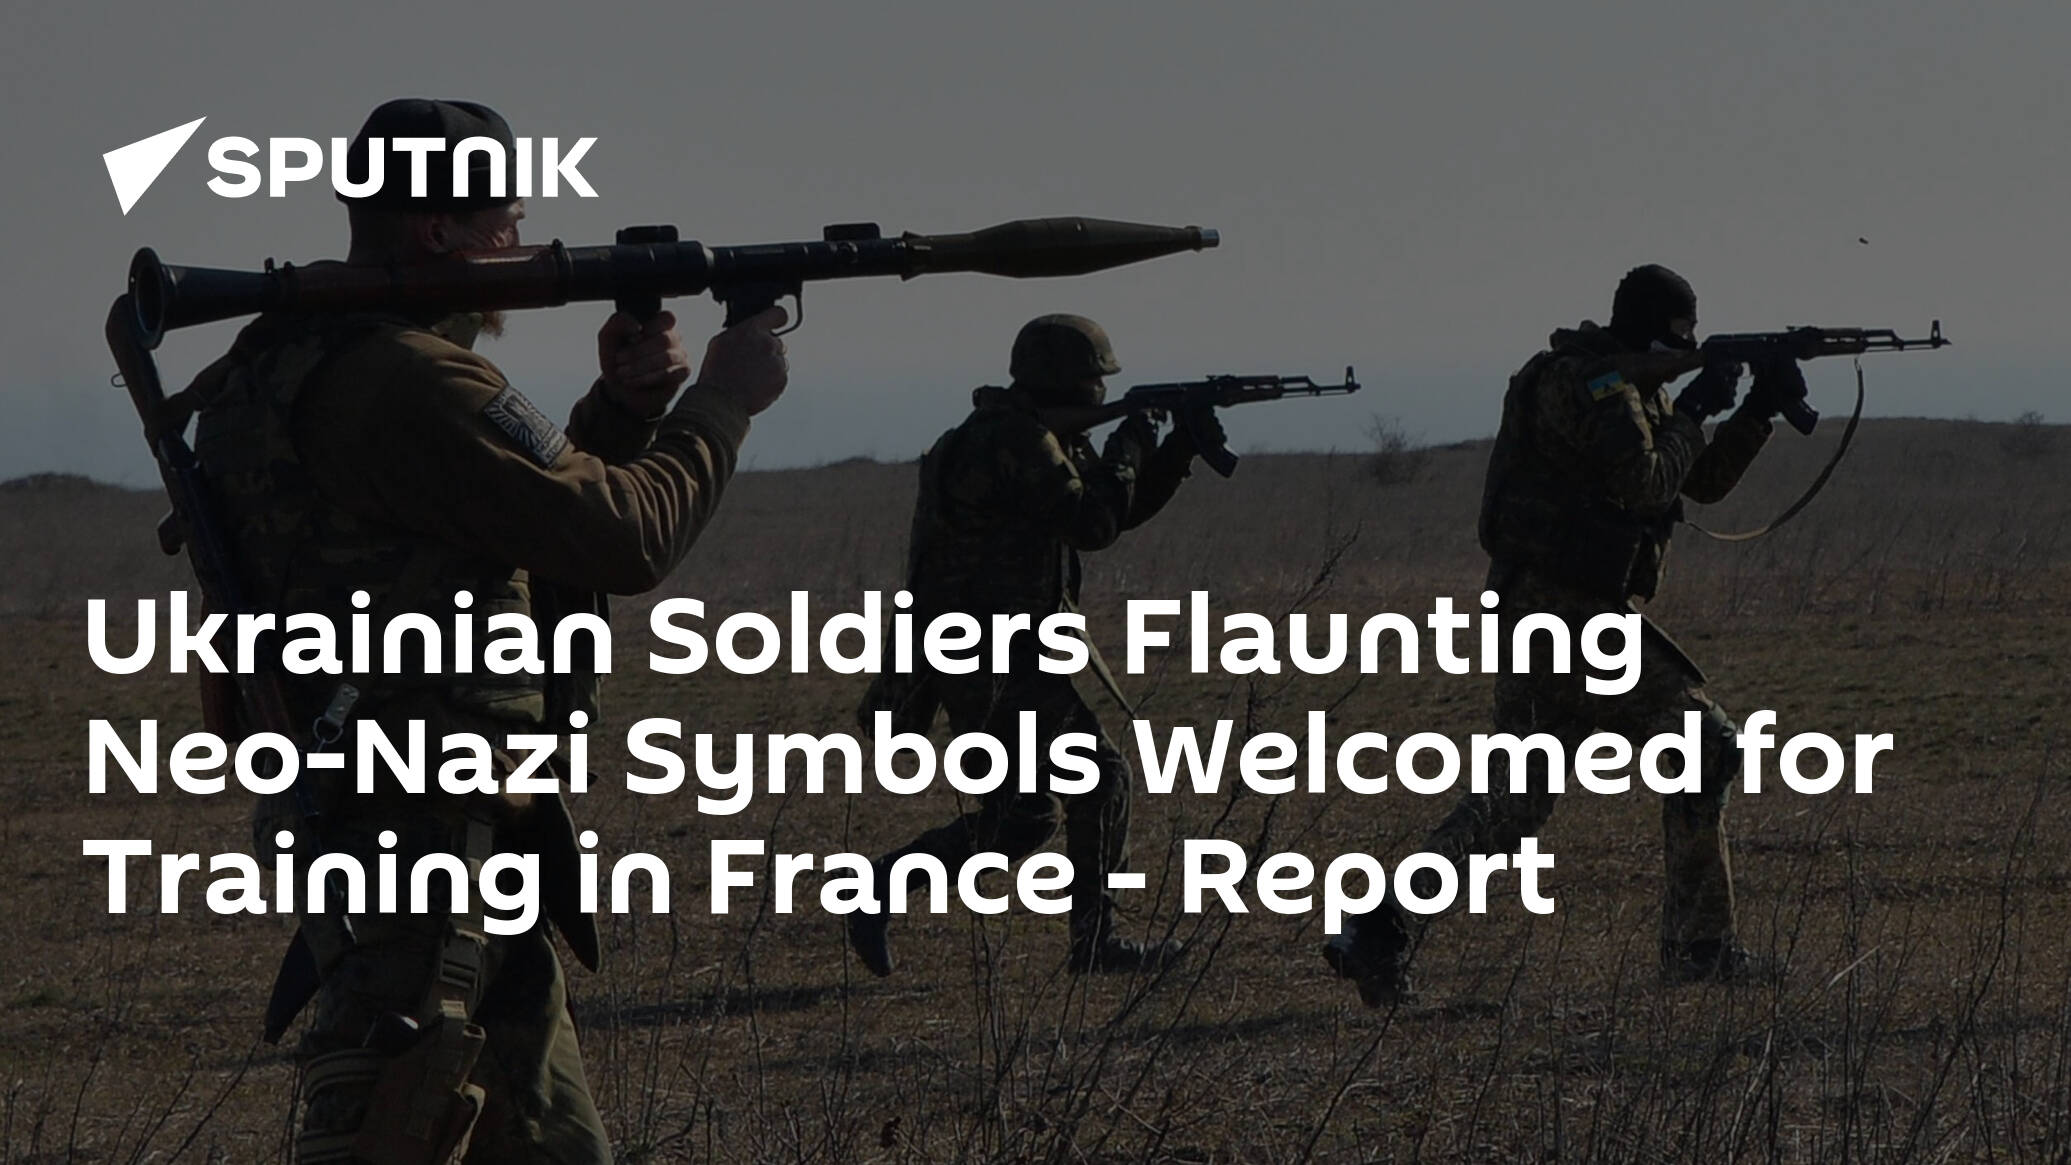 Ukrainian Soldiers Flaunting Neo-Nazi Symbols Welcomed for Training in France